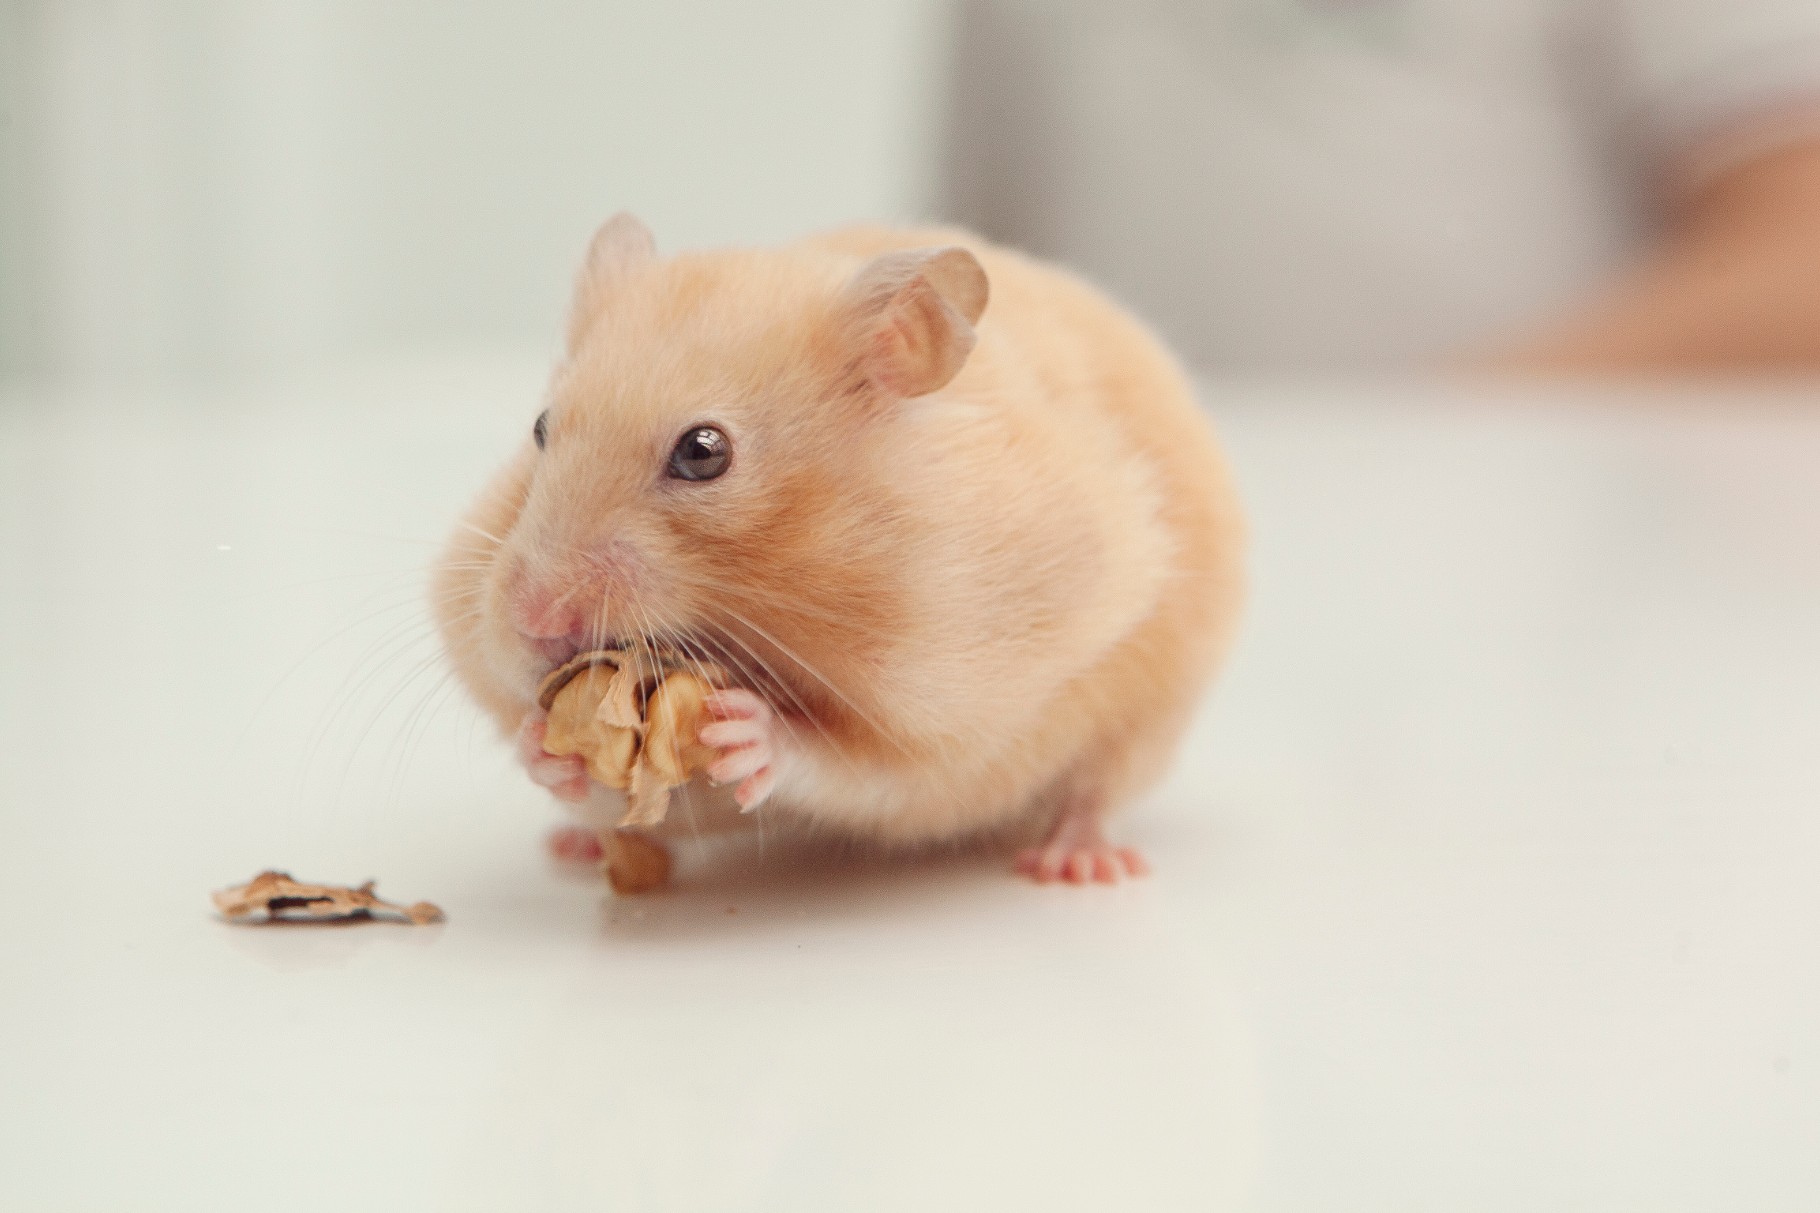 Hamster eating a nut